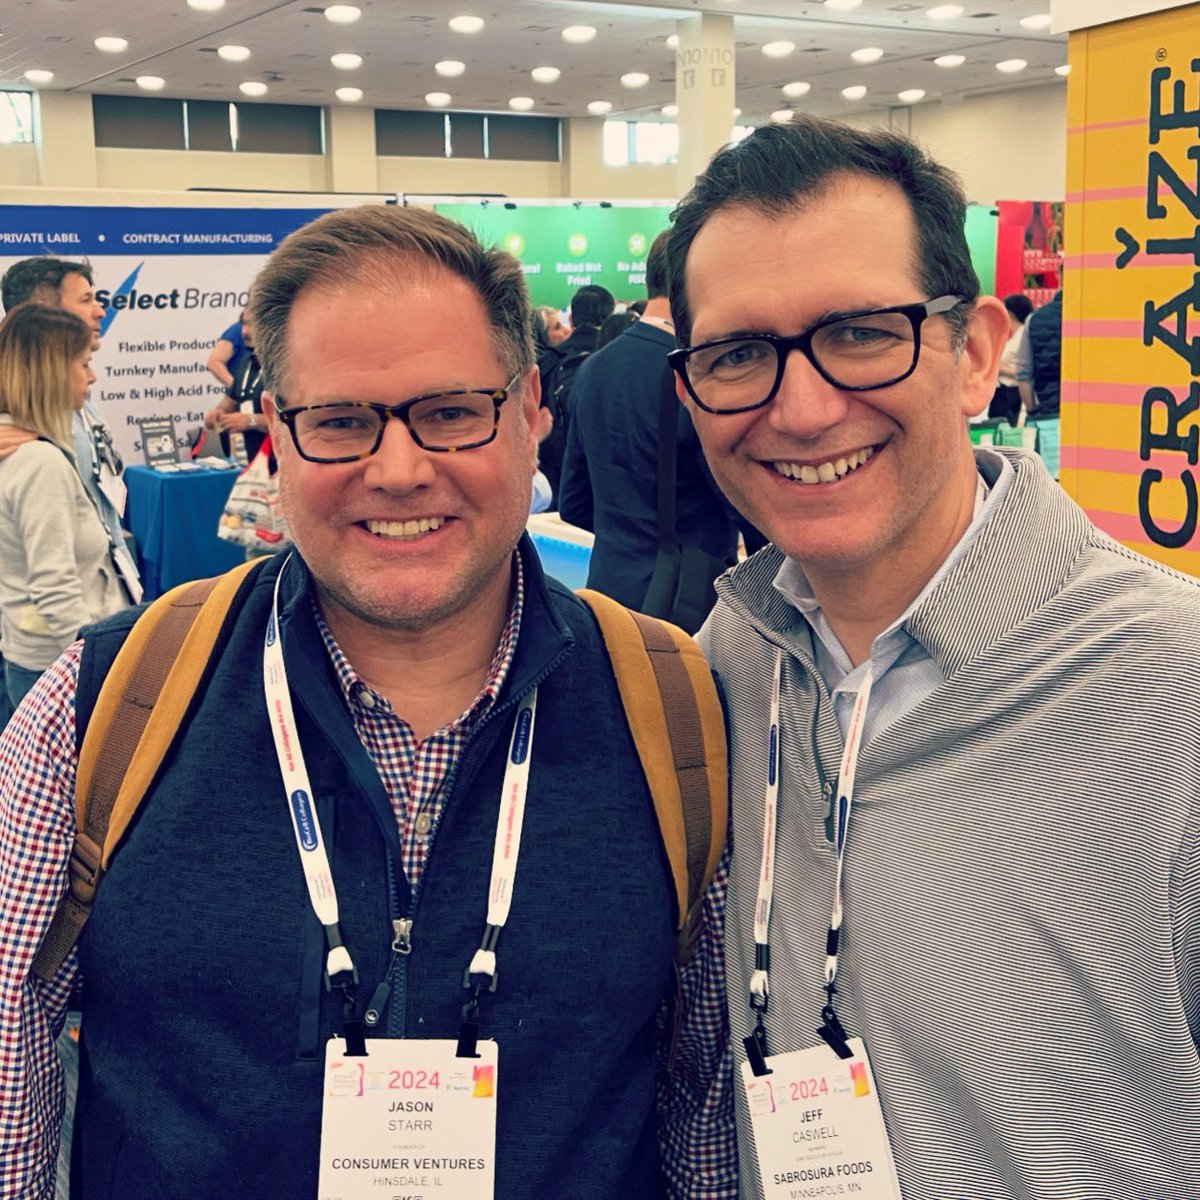 Another #ExpoWest in the books!

My key takeaways…

Our industry has such an amazing community that helps and supports each other (even when competitors). I’m so proud to be a part of it, and it was such a joy to spend the week in Anaheim with everyone.  After 17 years of Expos